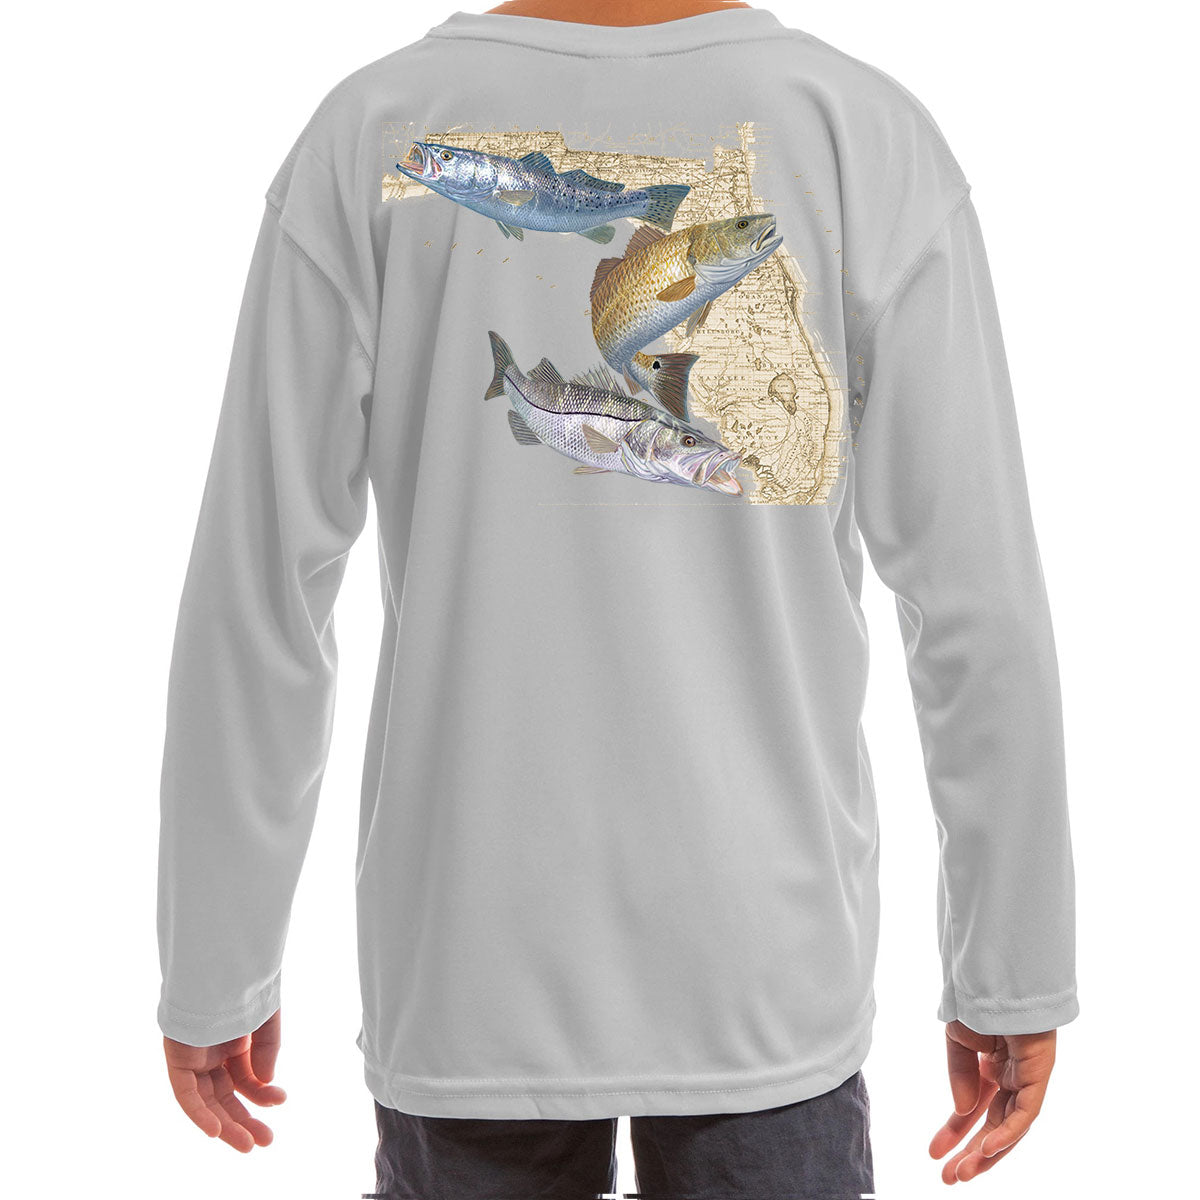 Youth/Kids Fishing Shirts Snook, Redfish & Trout Youth-Medium-8-10 / Pearl Gray